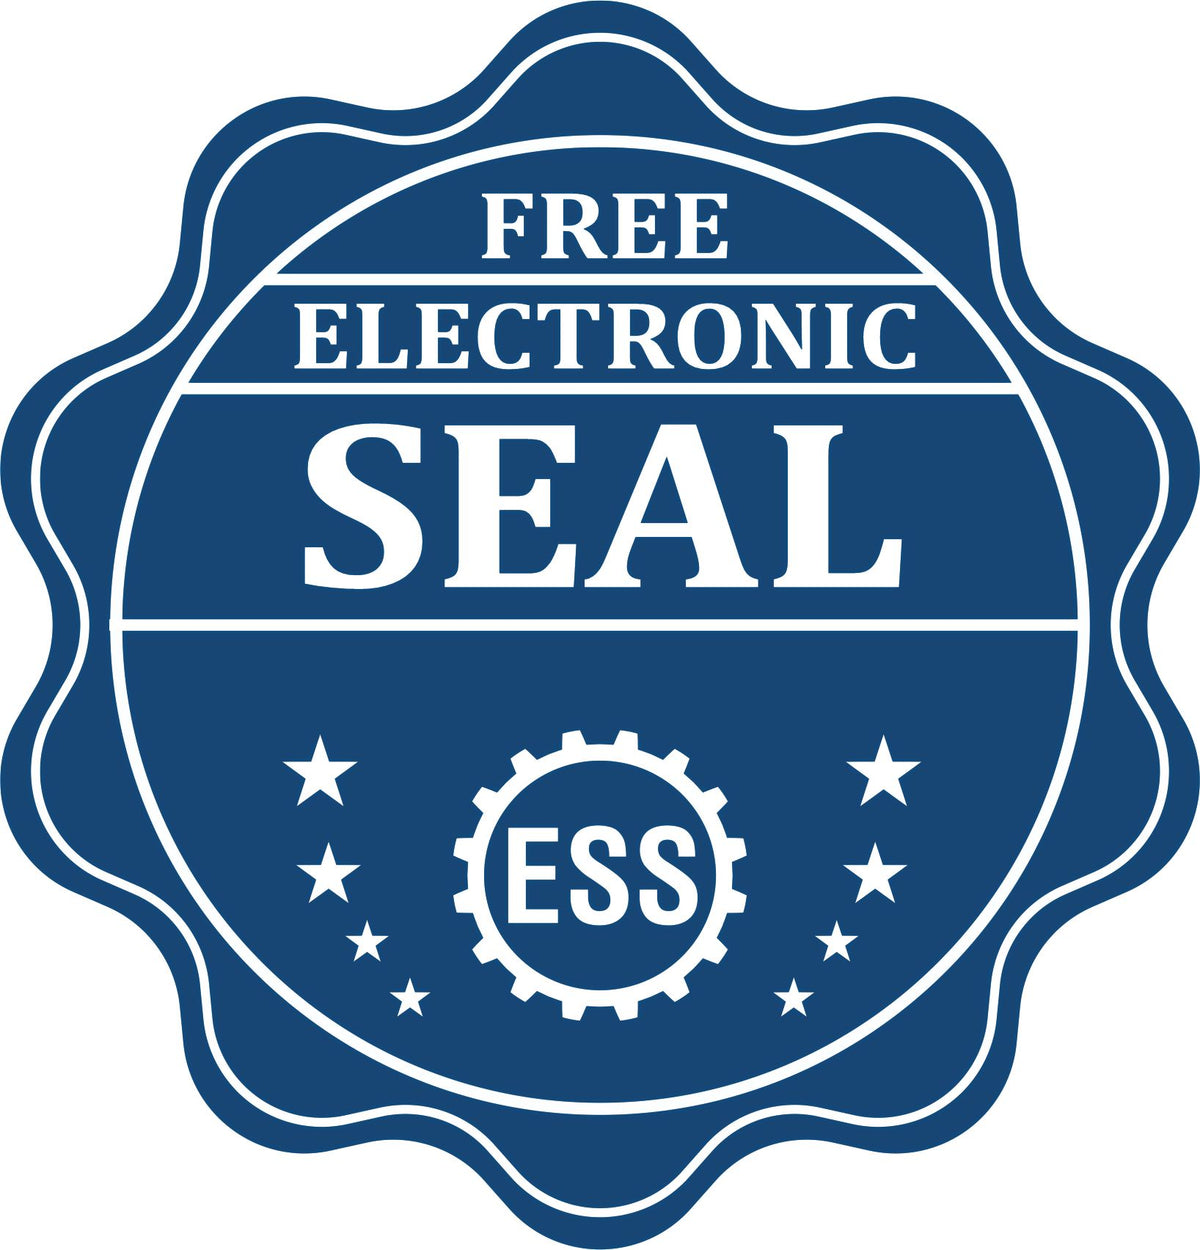 A badge showing a free electronic seal for the Slim Pre-Inked Oklahoma Professional Engineer Seal Stamp with stars and the ESS gear on the emblem.